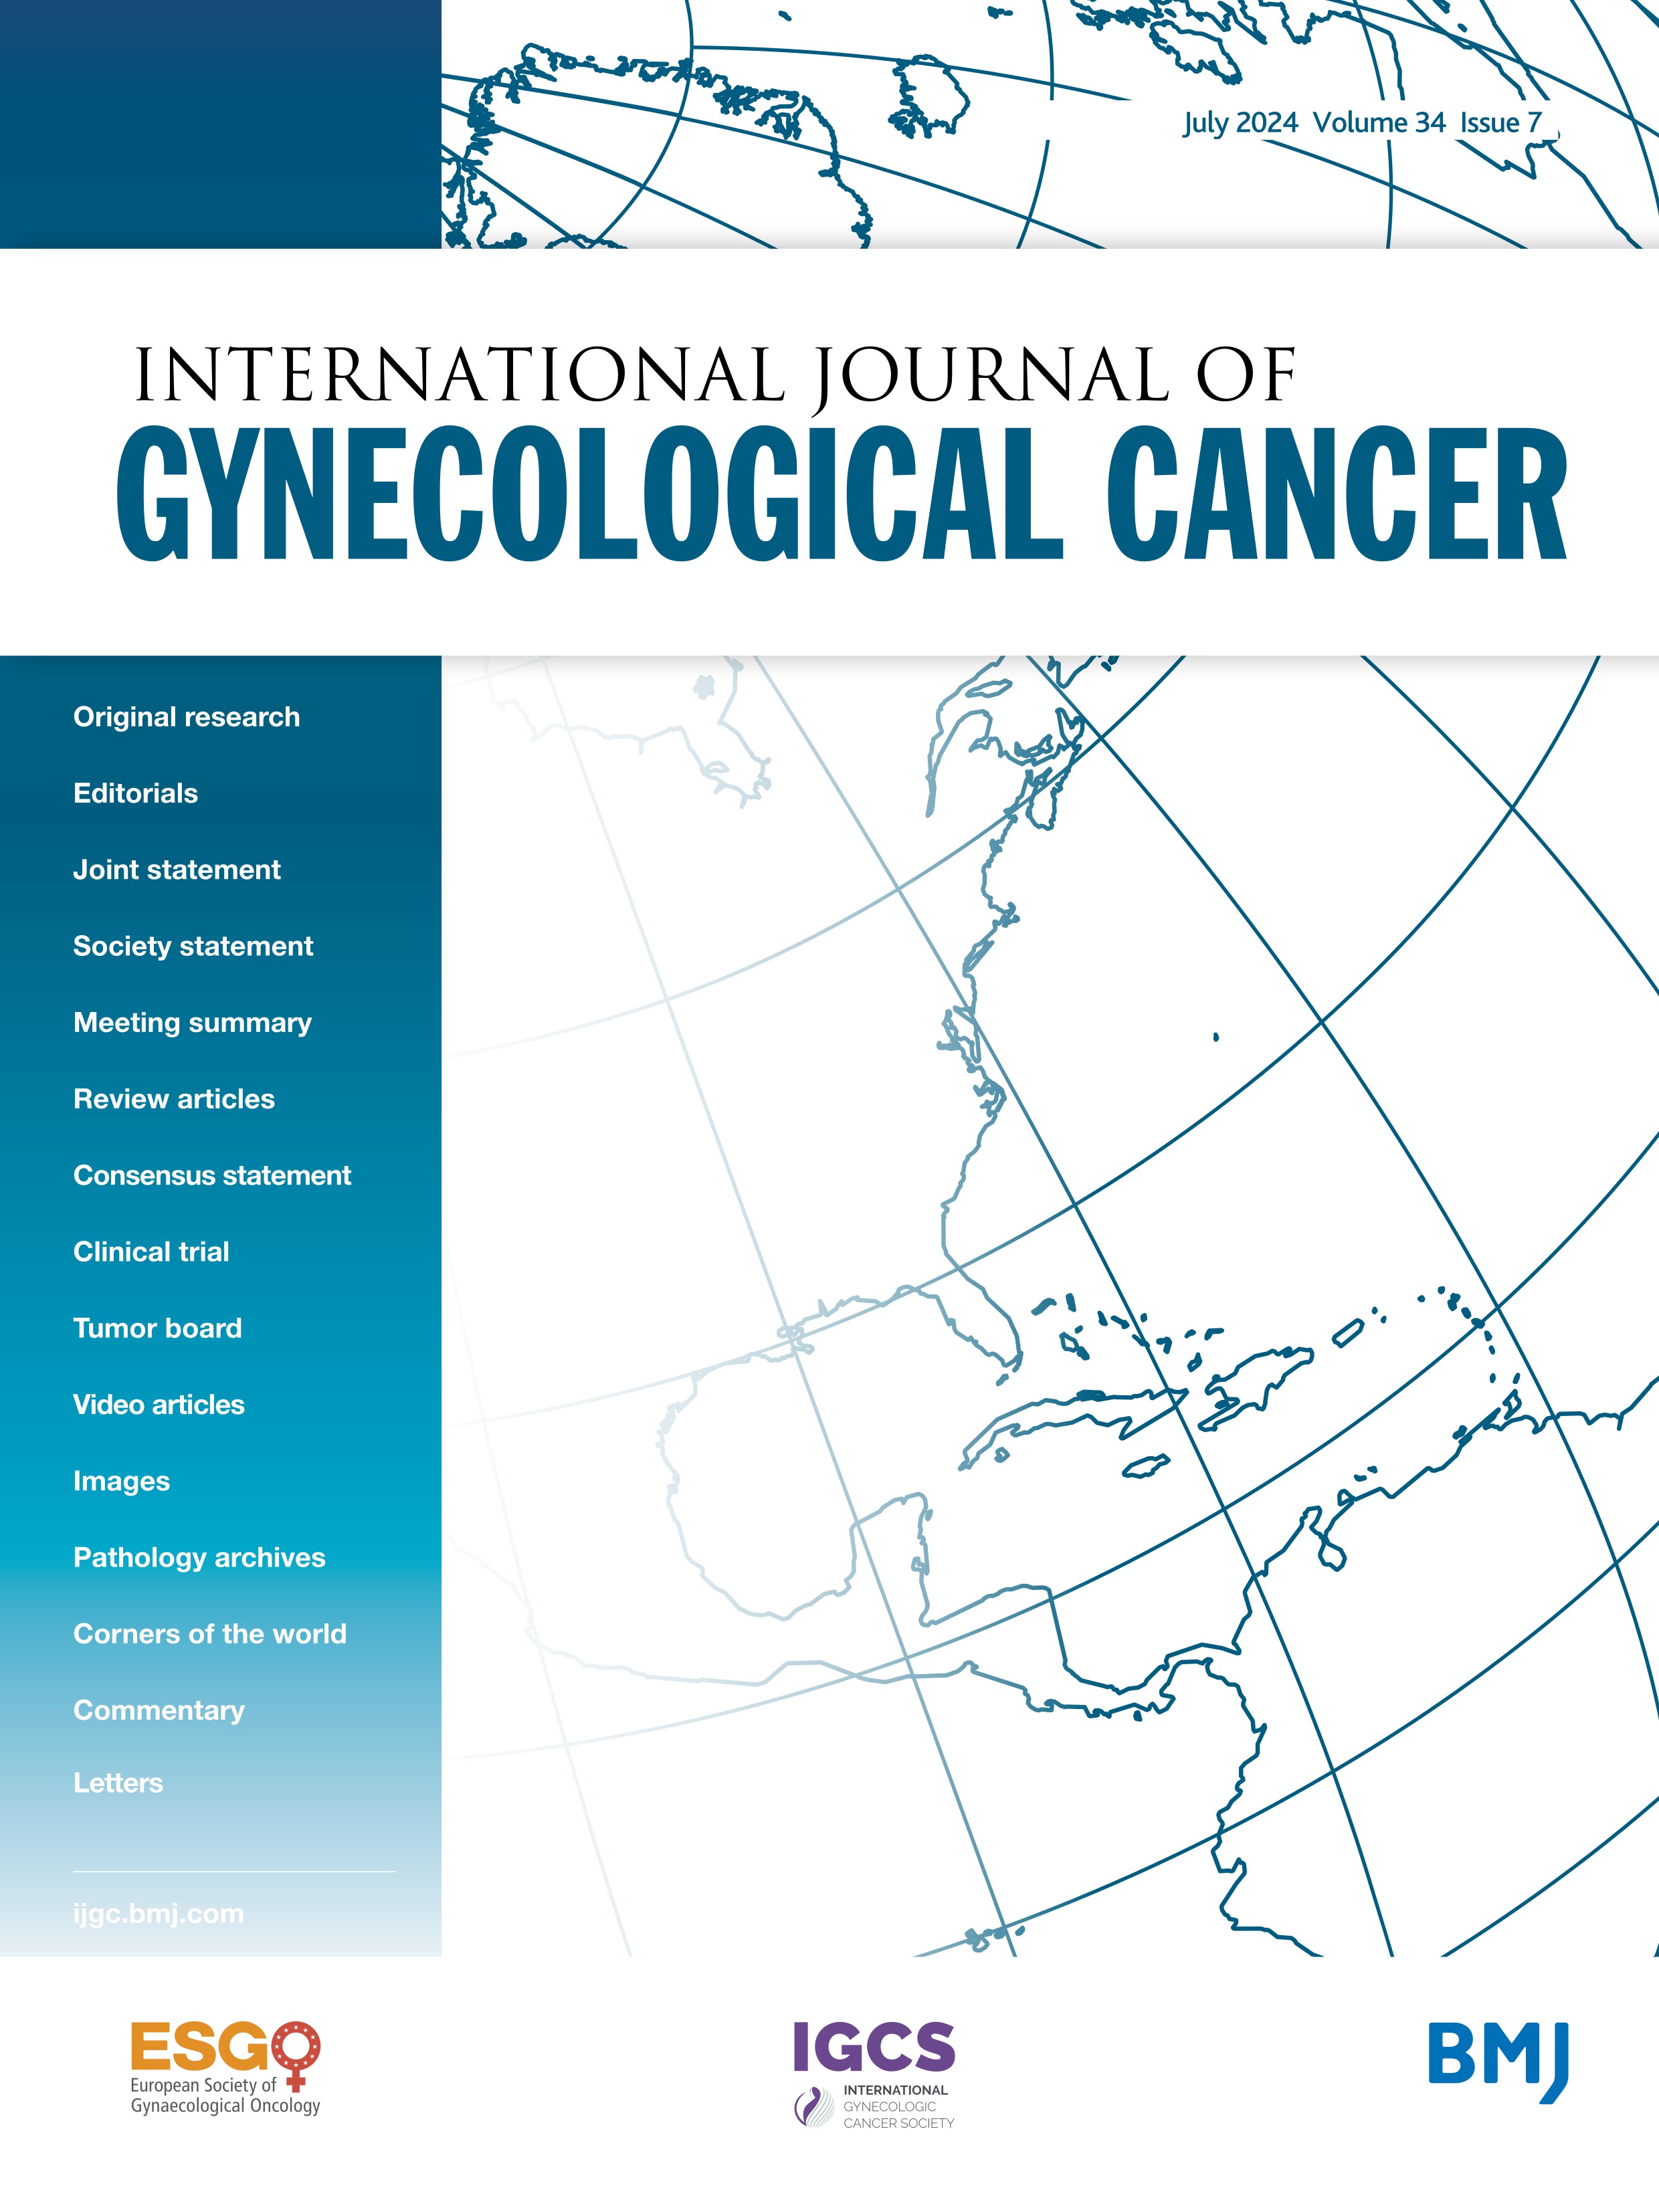 Evidence and best practices for trauma-informed care in gynecologic oncology patients